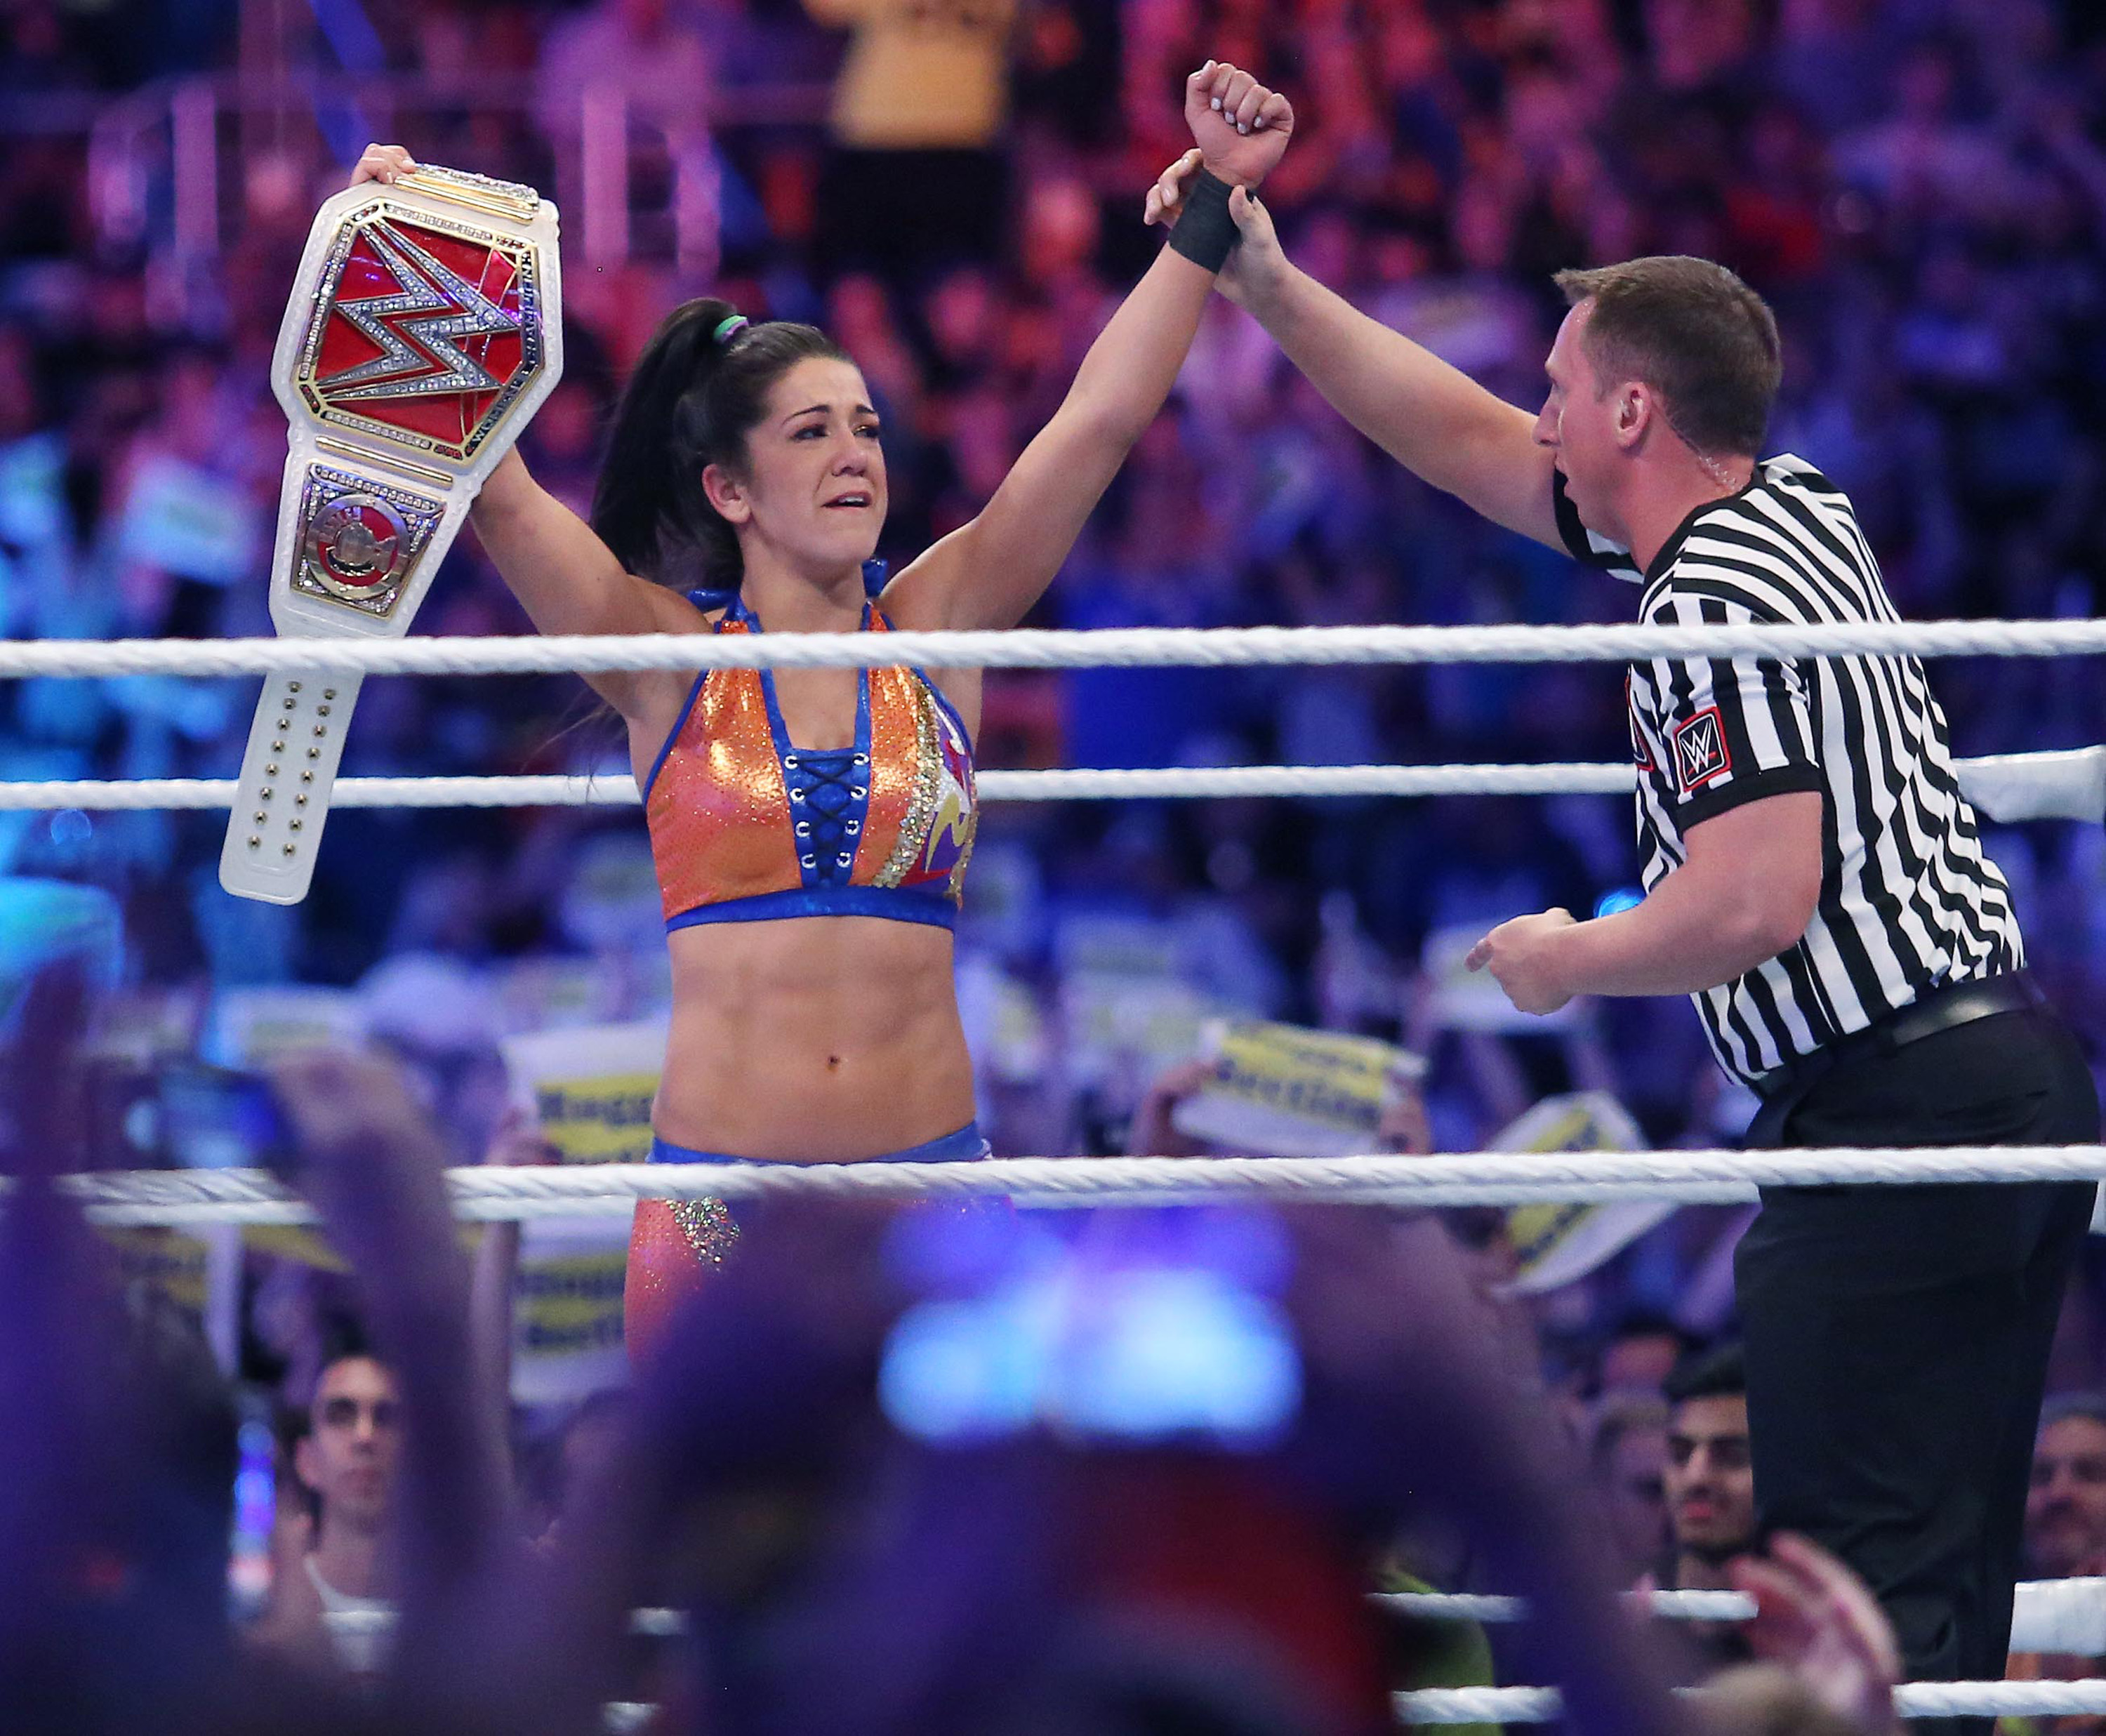 Ready to Rumble: Grading the Card from Wrestlemania 33